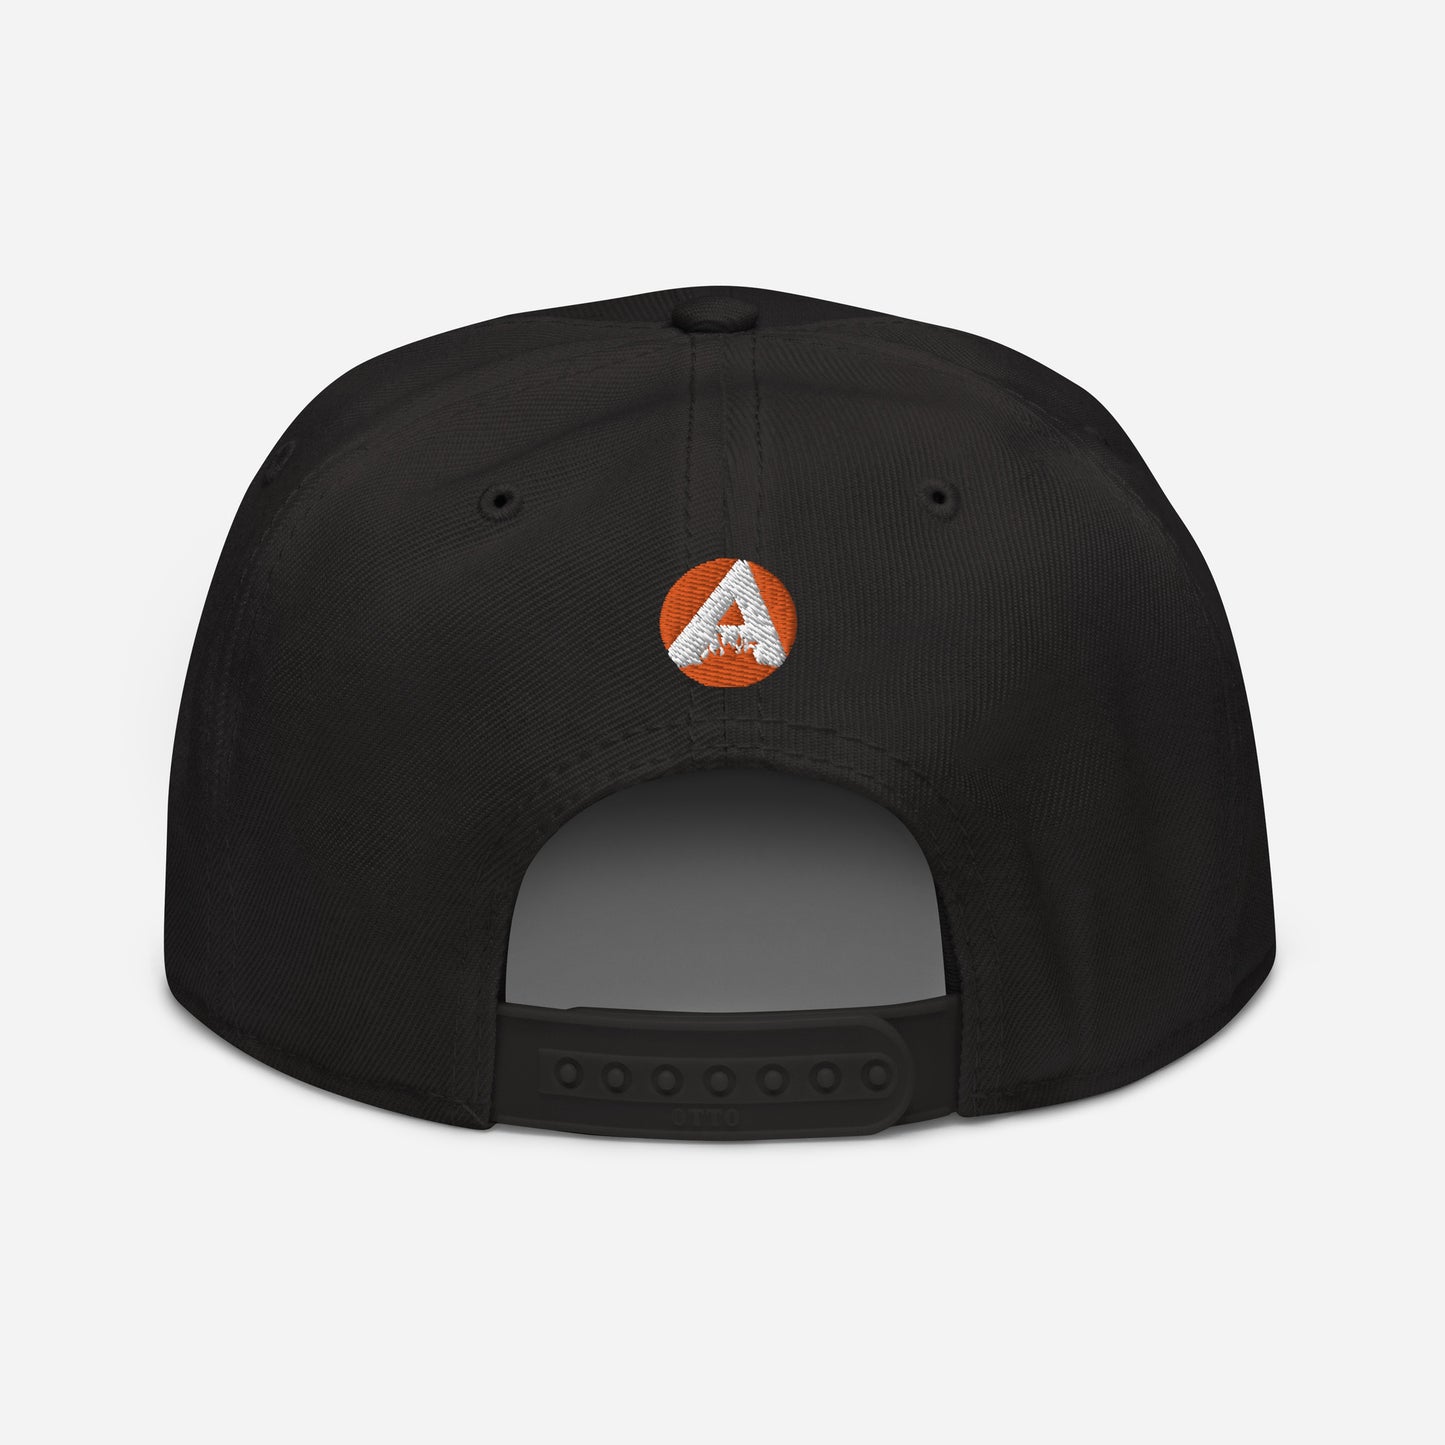 MIA Conglomerate Hat